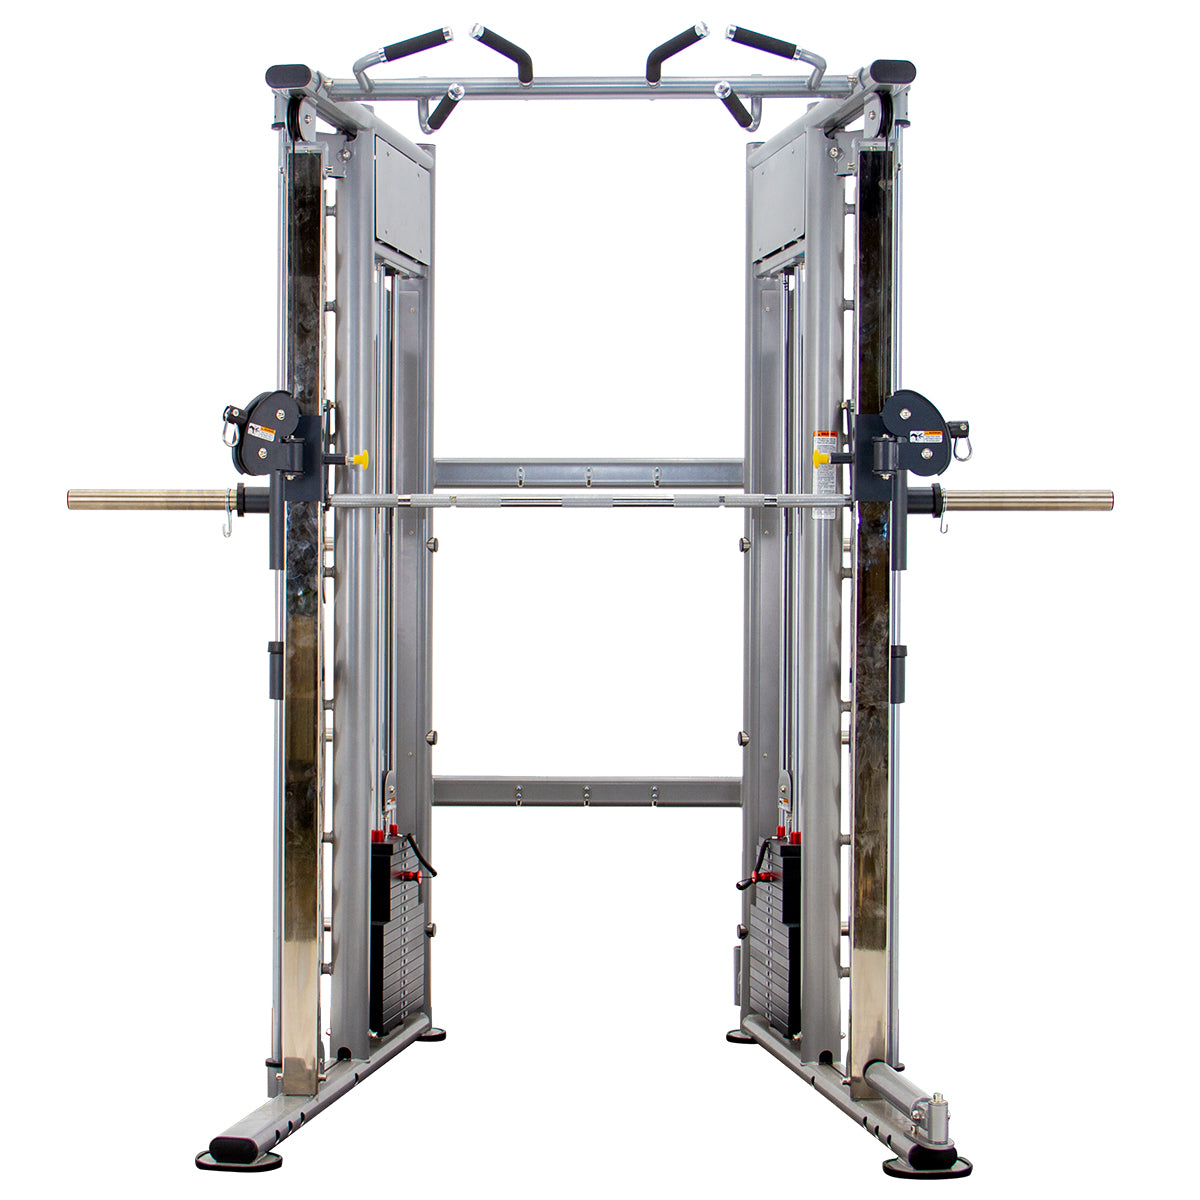 CGS Universal Trainer weights and cable machine all in one training system